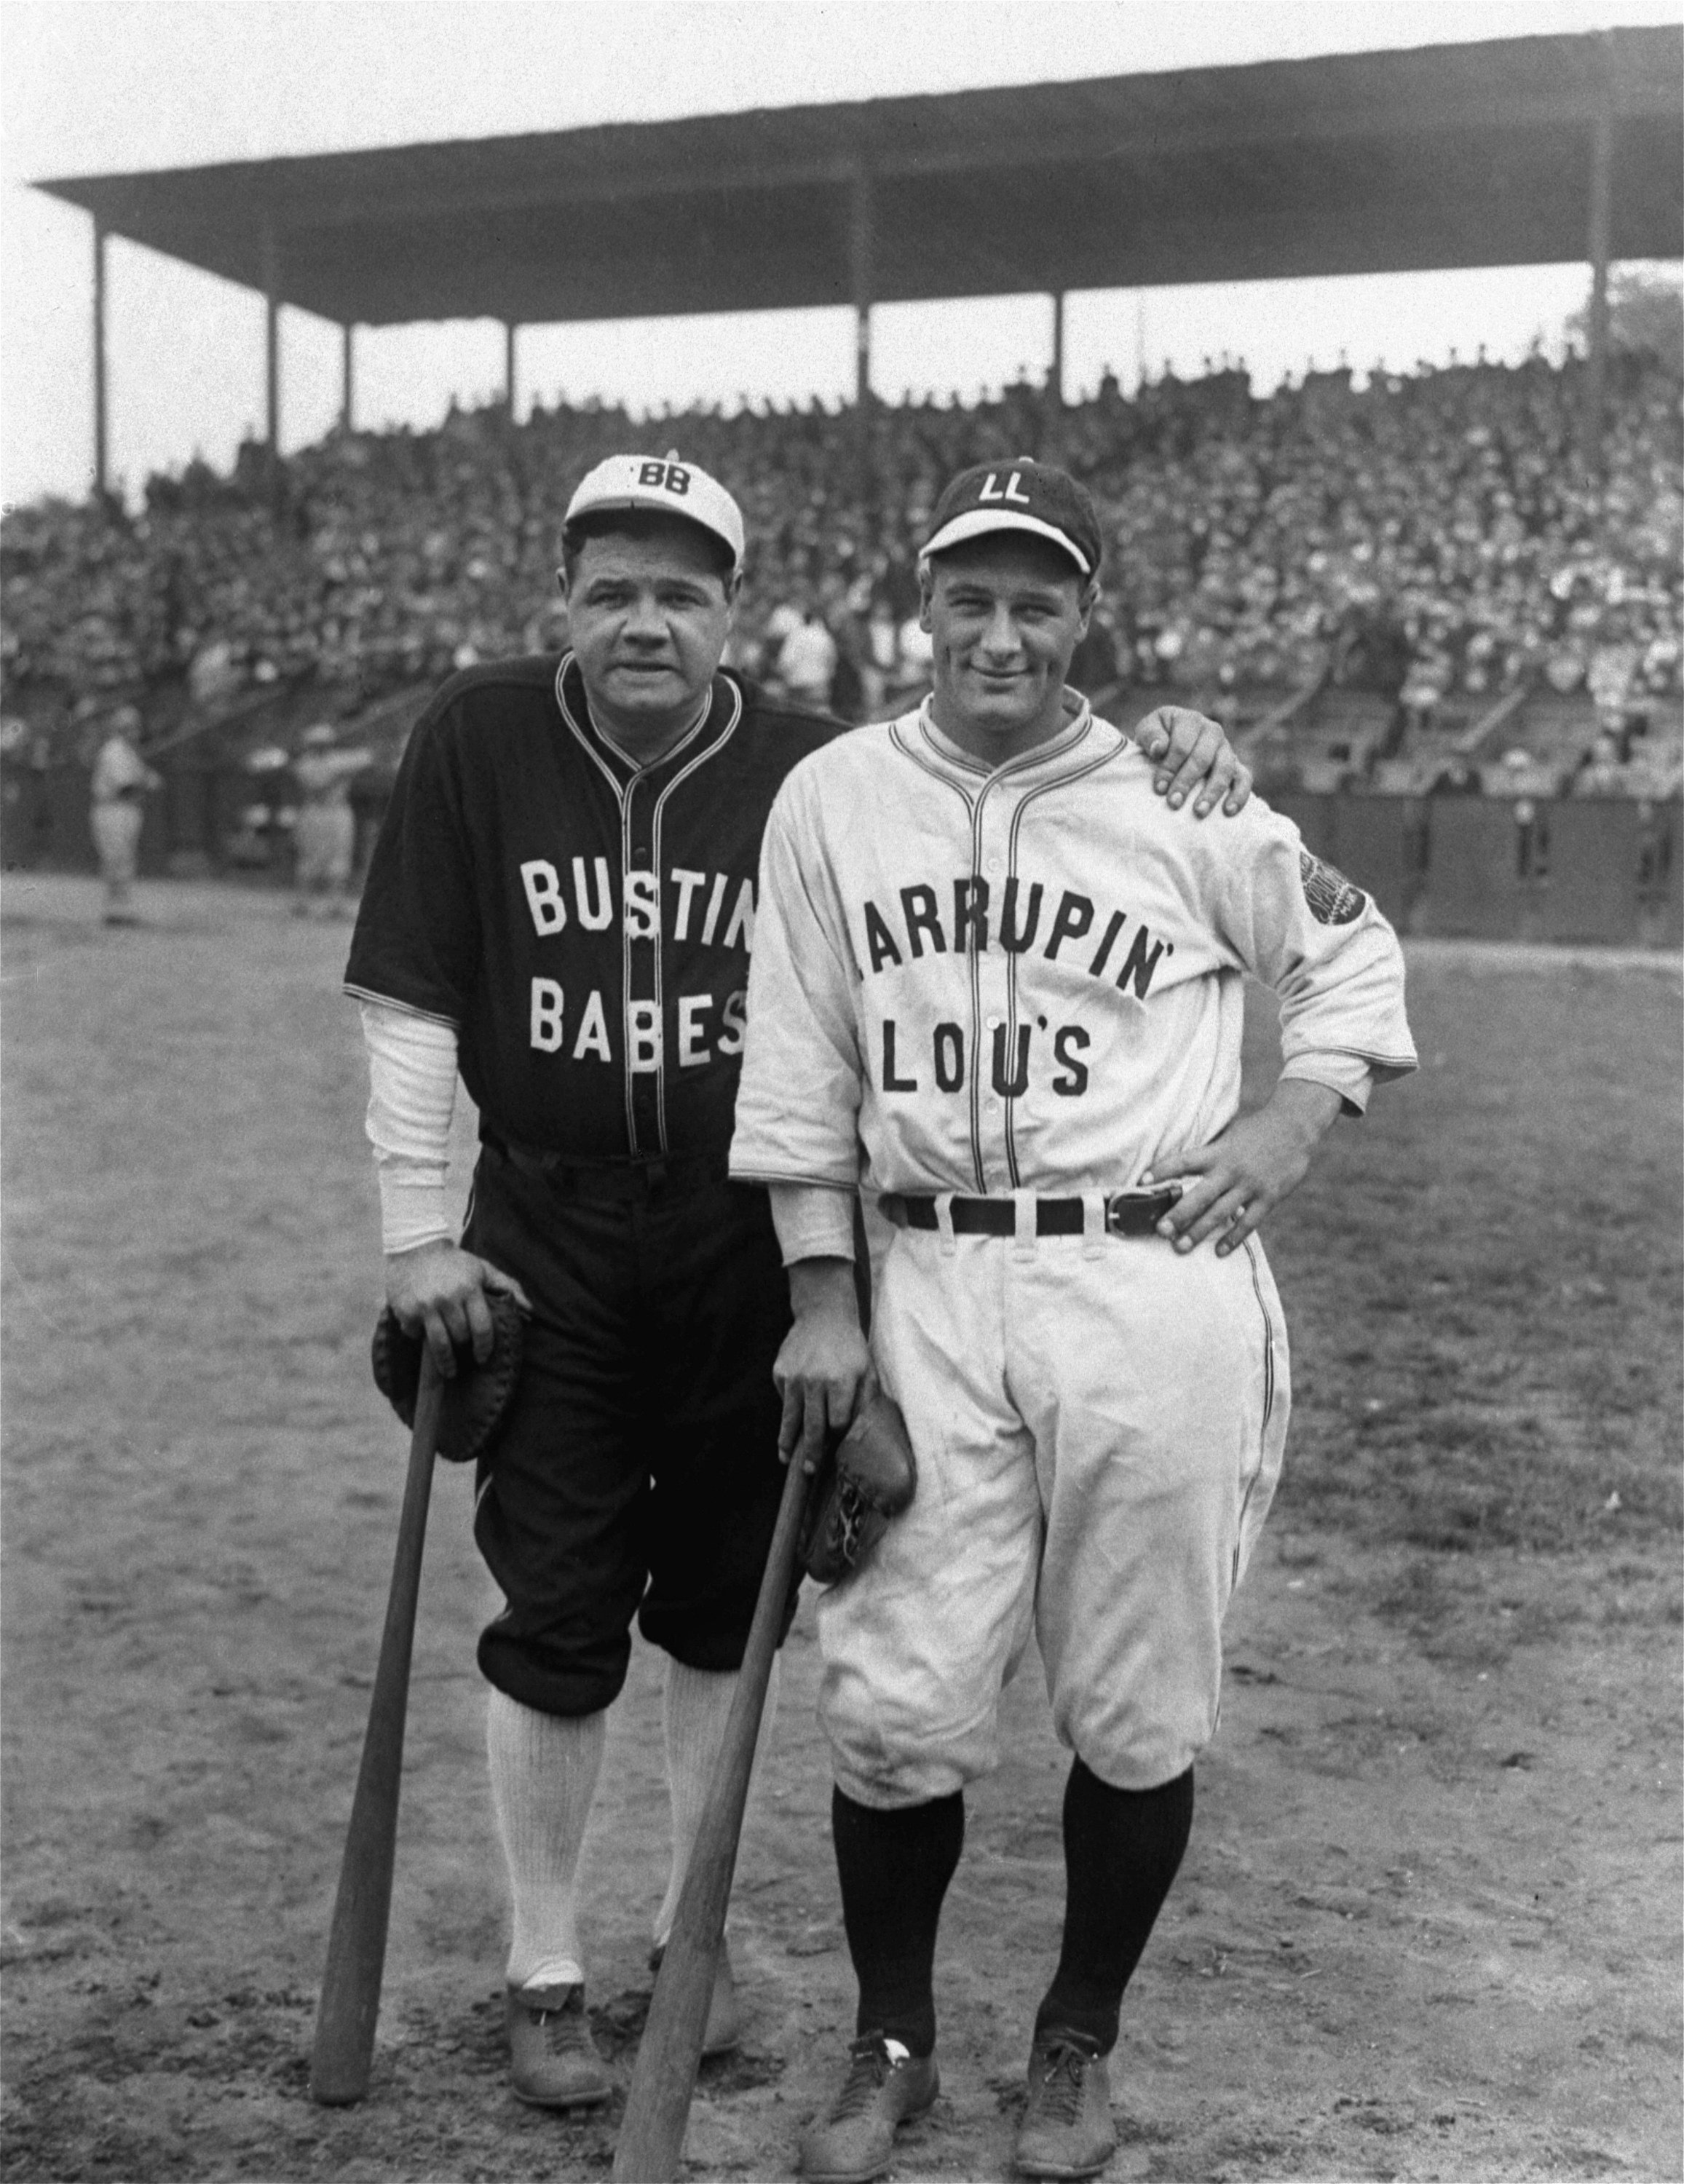  Just a few days after sweeping the Pittsburgh Pirates in the World Series, New York Yankees stars Babe Ruth, left, and Lou Gehrig pose at an exhibition game during a postseason barnstorming tour, October 1927. The "Bustin' Babes" and the "Larrupin' 